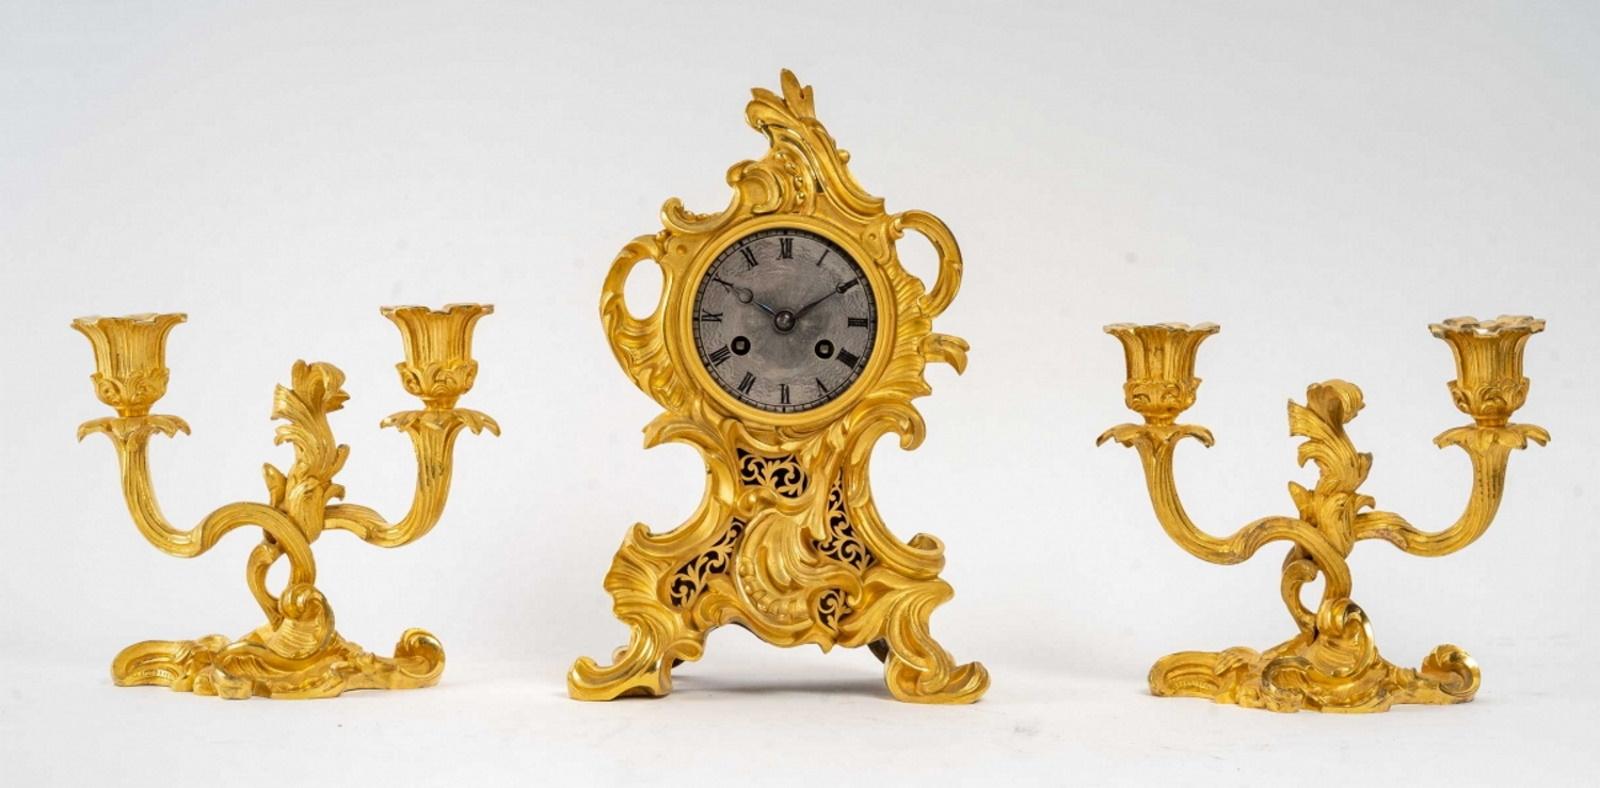 Gilded bronze mantel set - Louis XV style - Napoleon III period - 19th century
It is composed of a clock resting on four arched feet, with rocaille decoration, as well as a pair of candelabras with two intertwined arms of light with very pronounced